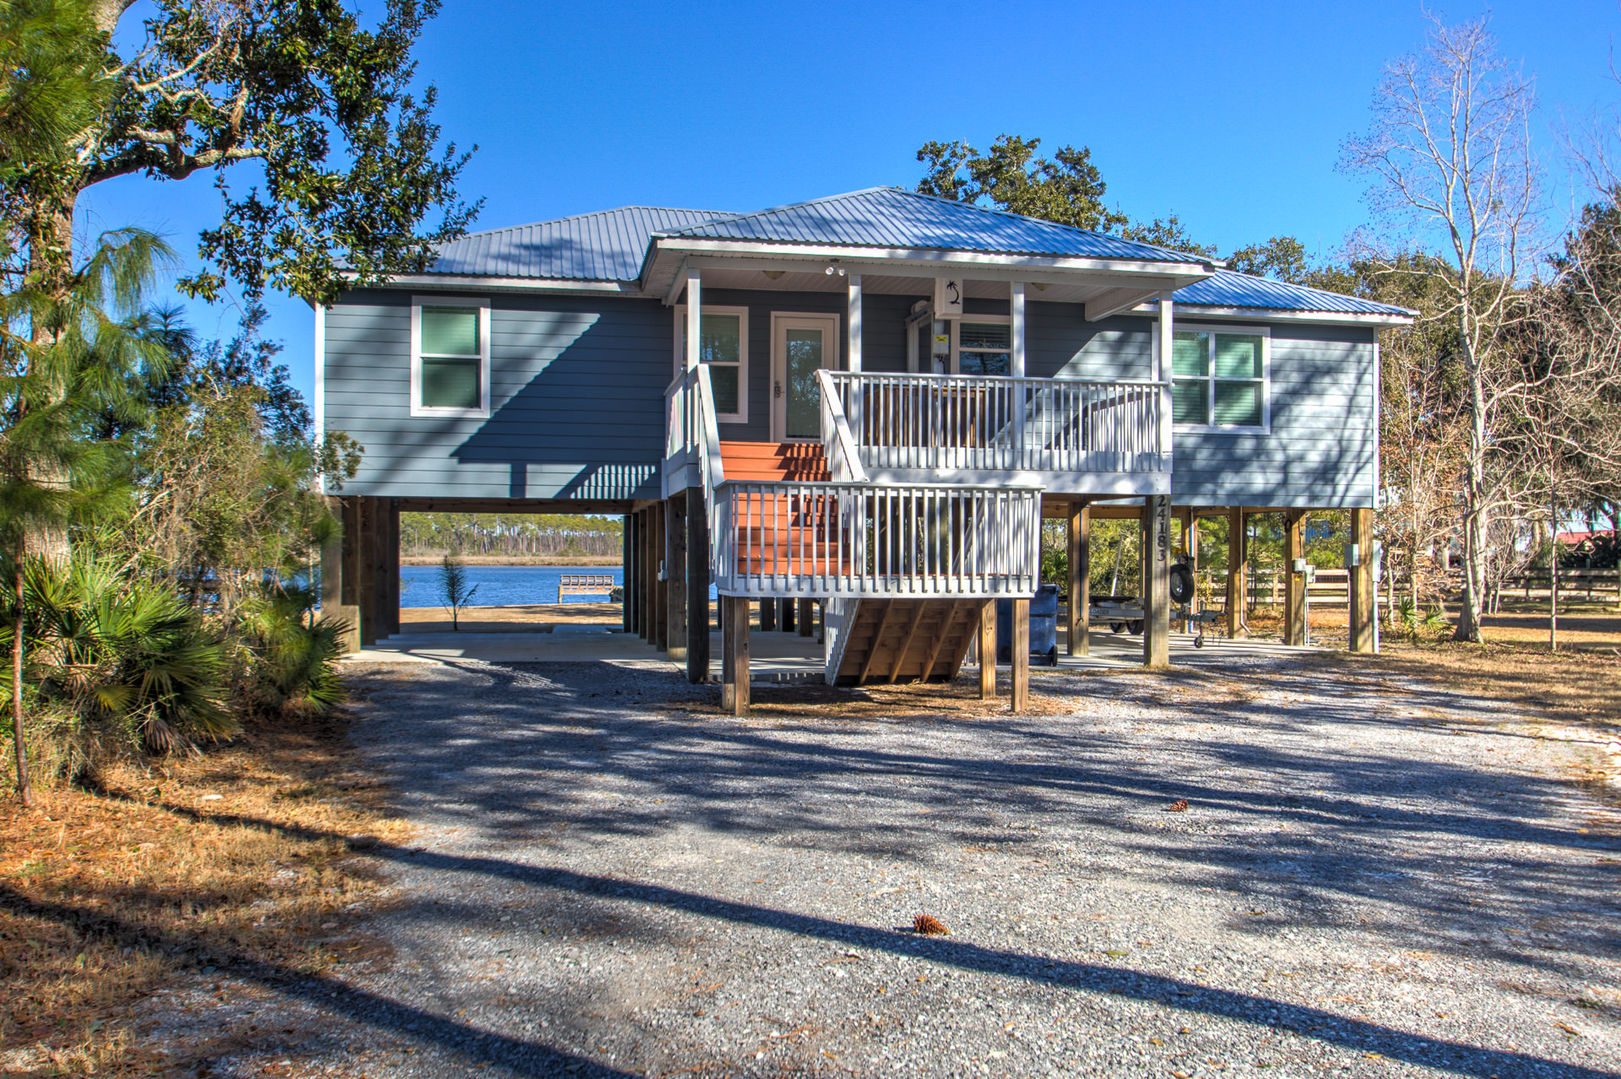 Vacation homes for rent in Gulf Shores Alabama